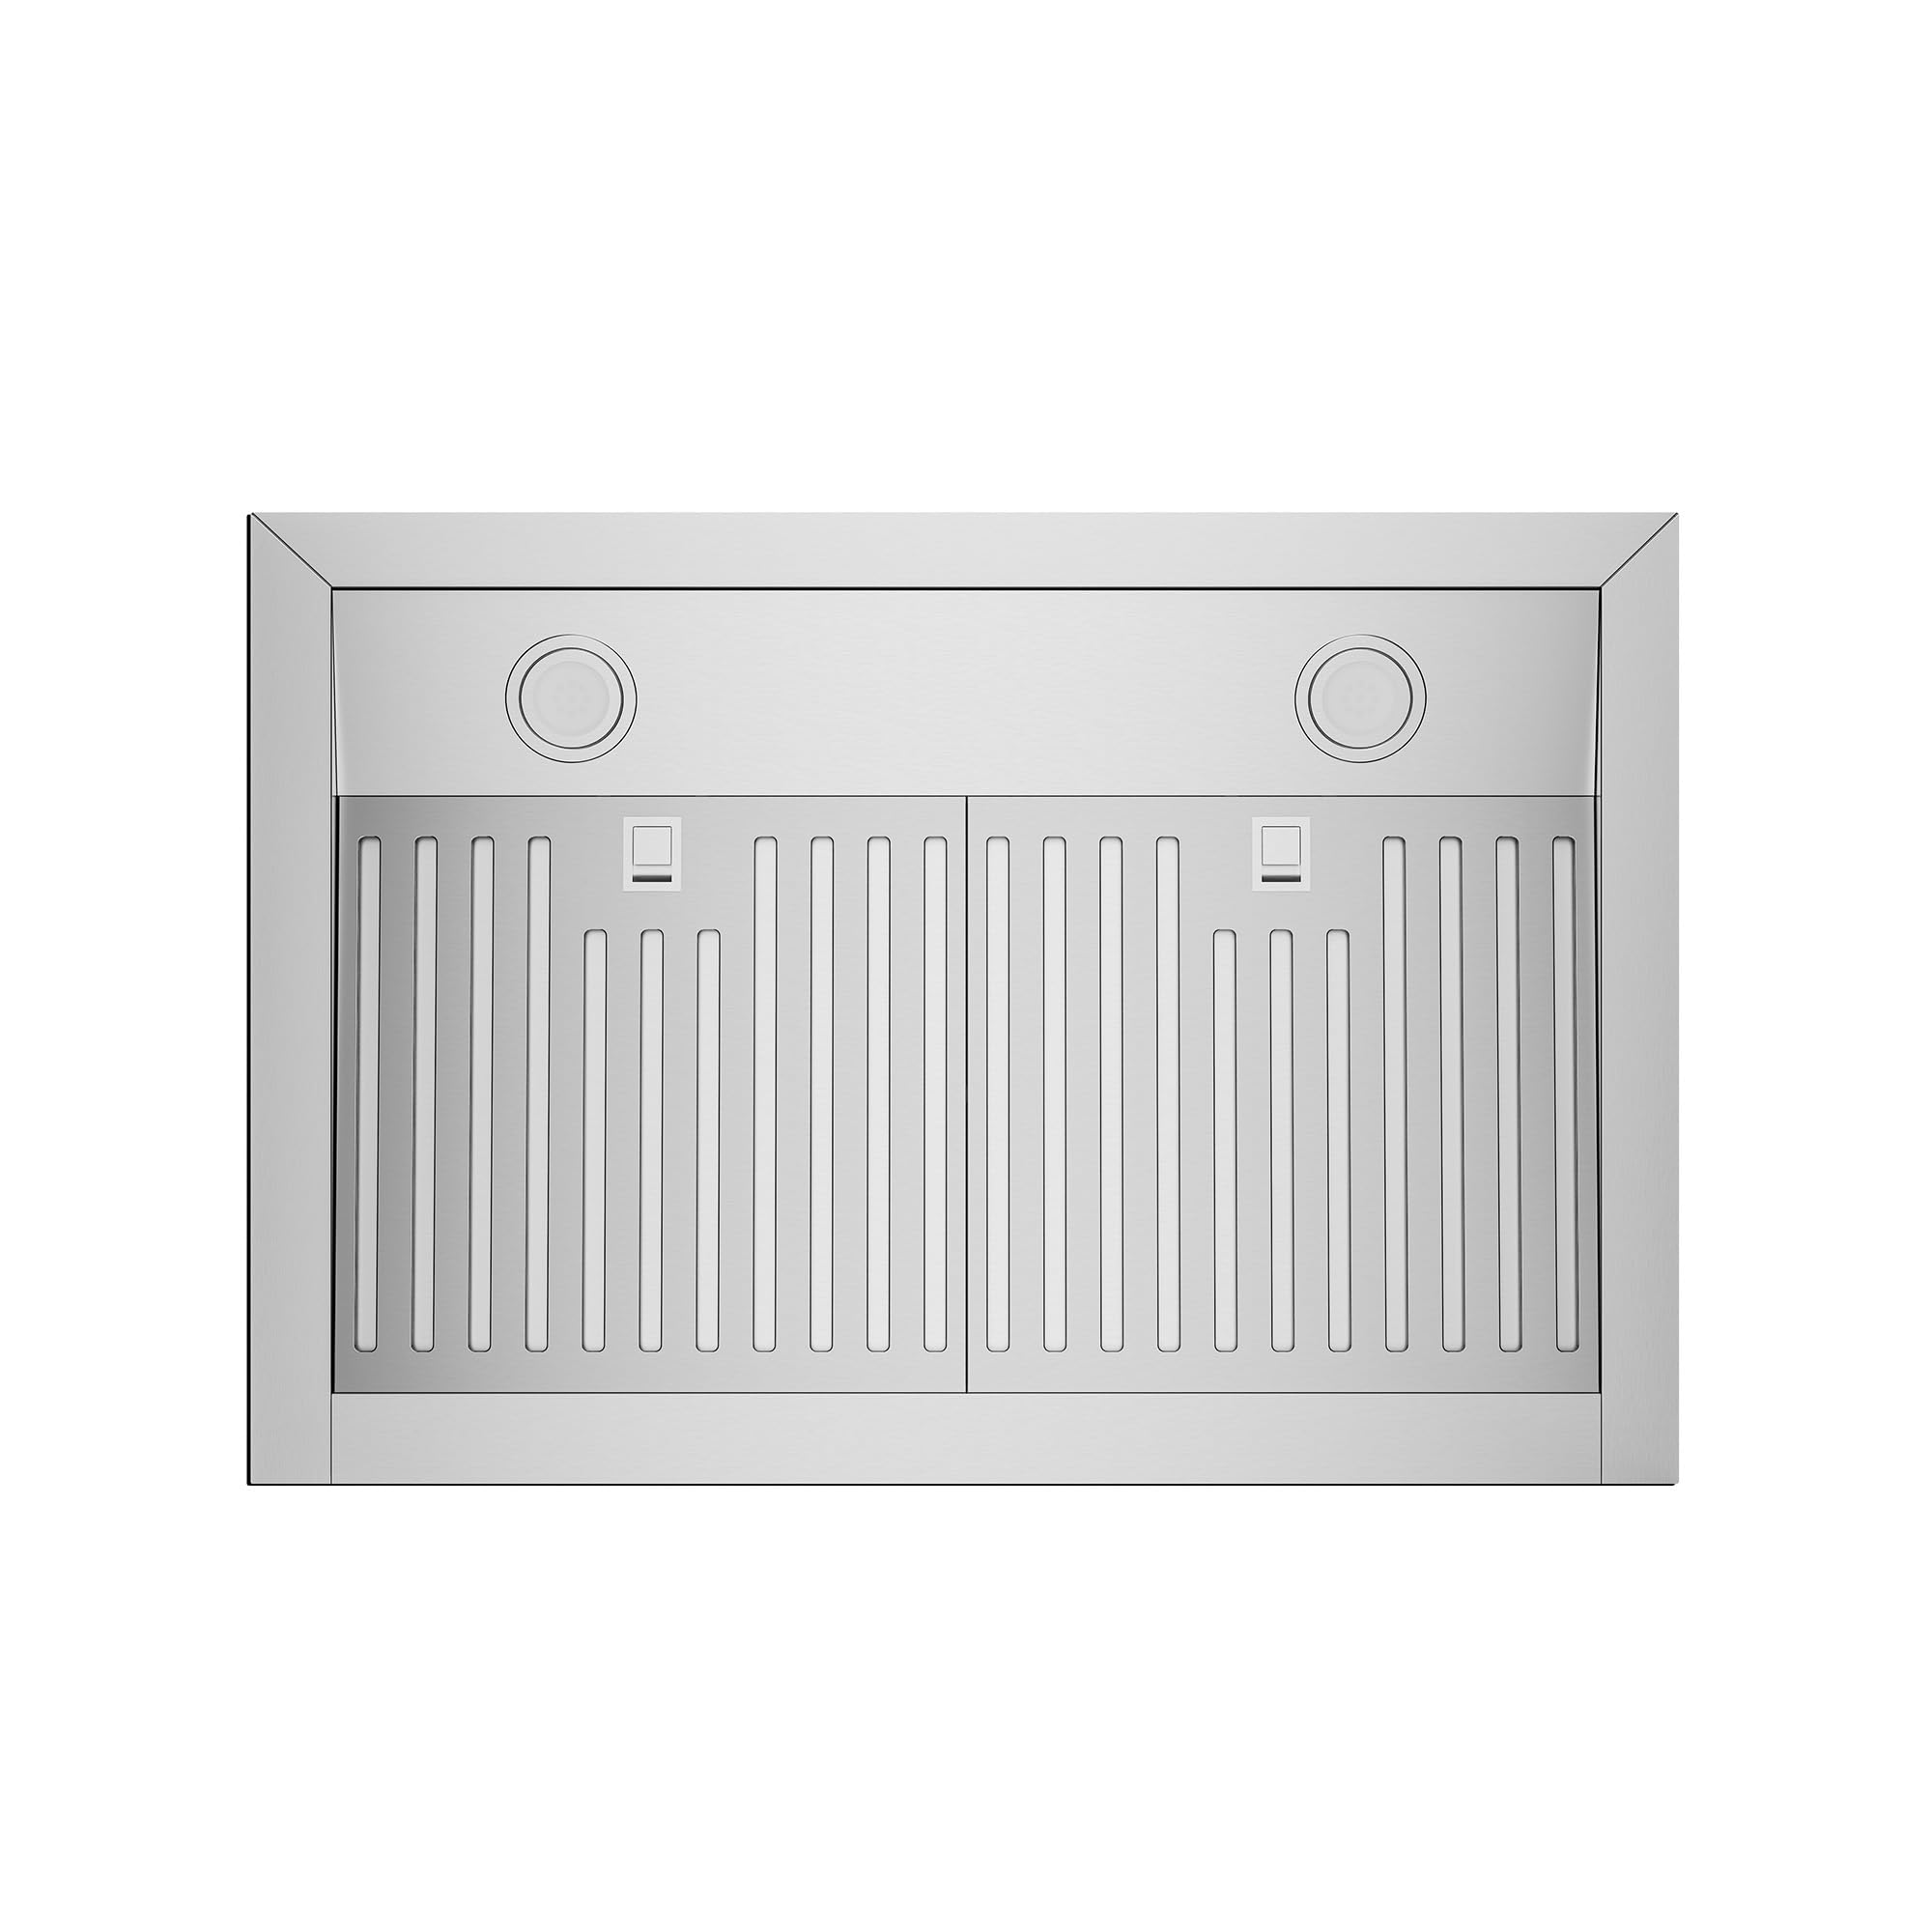 Empava Under Cabinet Range Hood, Ducted/Ductless(Charcoal-filter Sold Separately), Touch Control, 3-Speed, 400 CFM Stainless Steel, 30 in. RH07